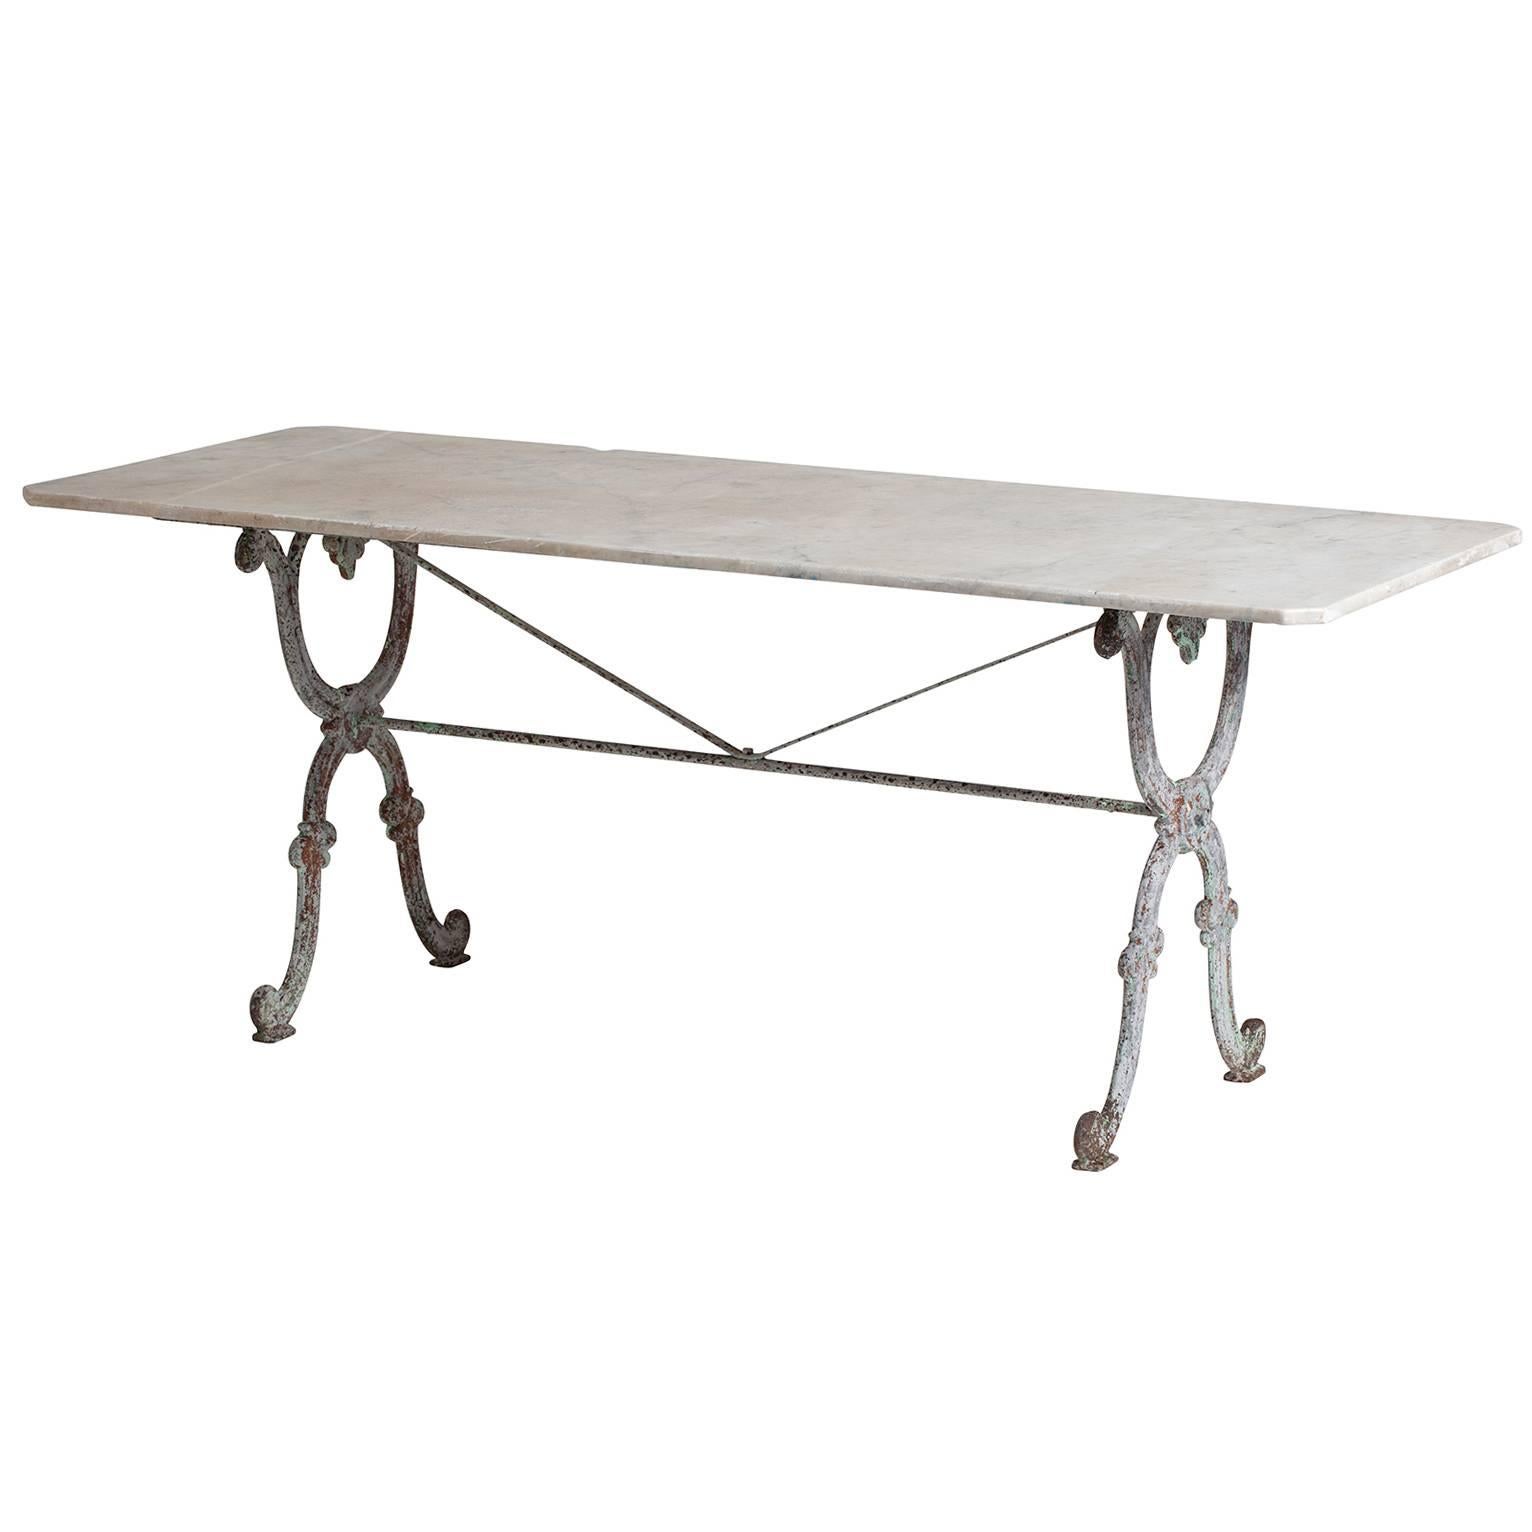 Large French Garden Table with Original Marble Top, circa 1880